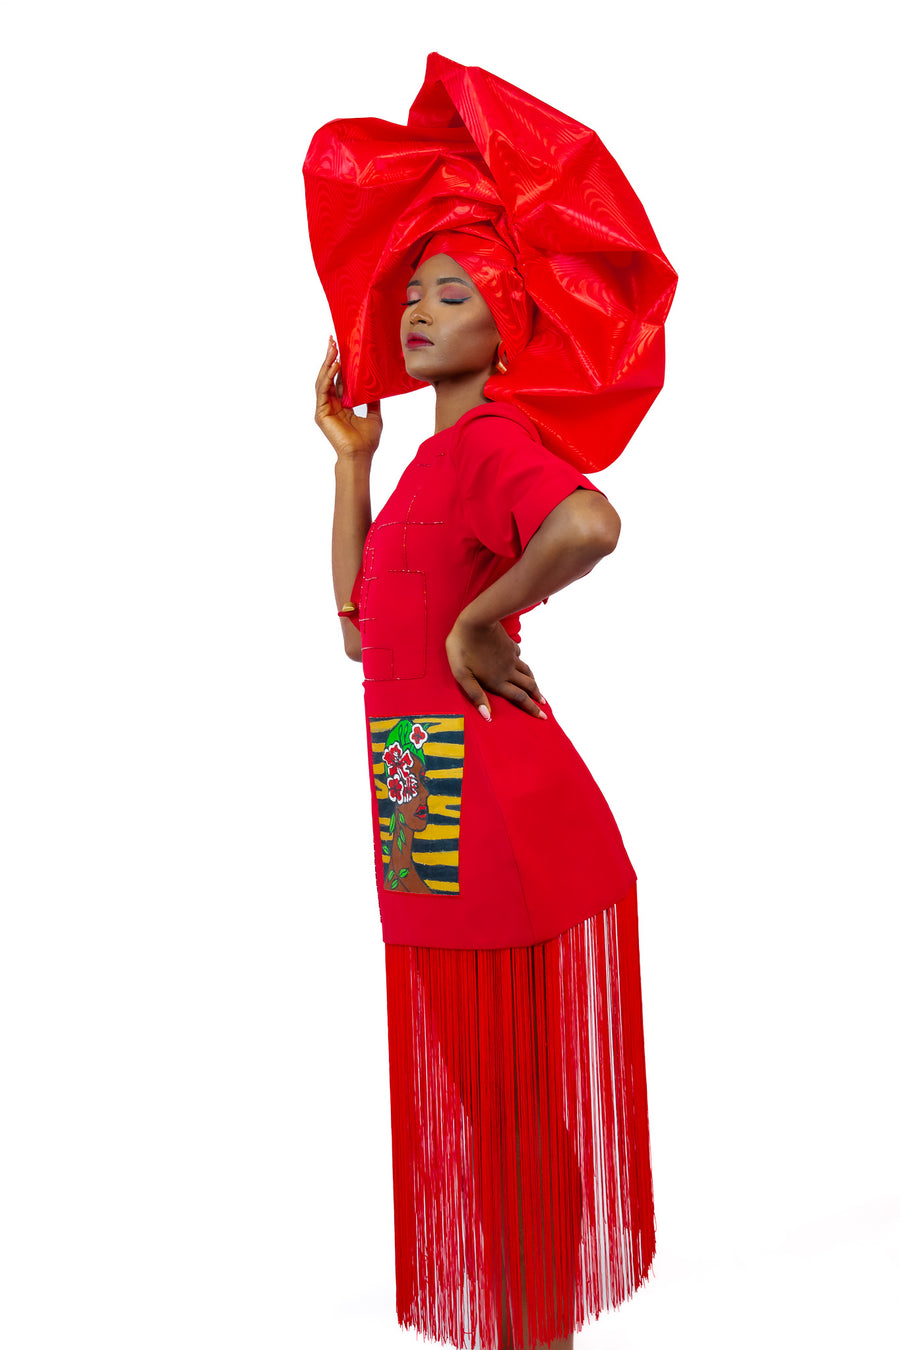 HAND PAINTED STRUCTURED RED DRESS ADM Projects